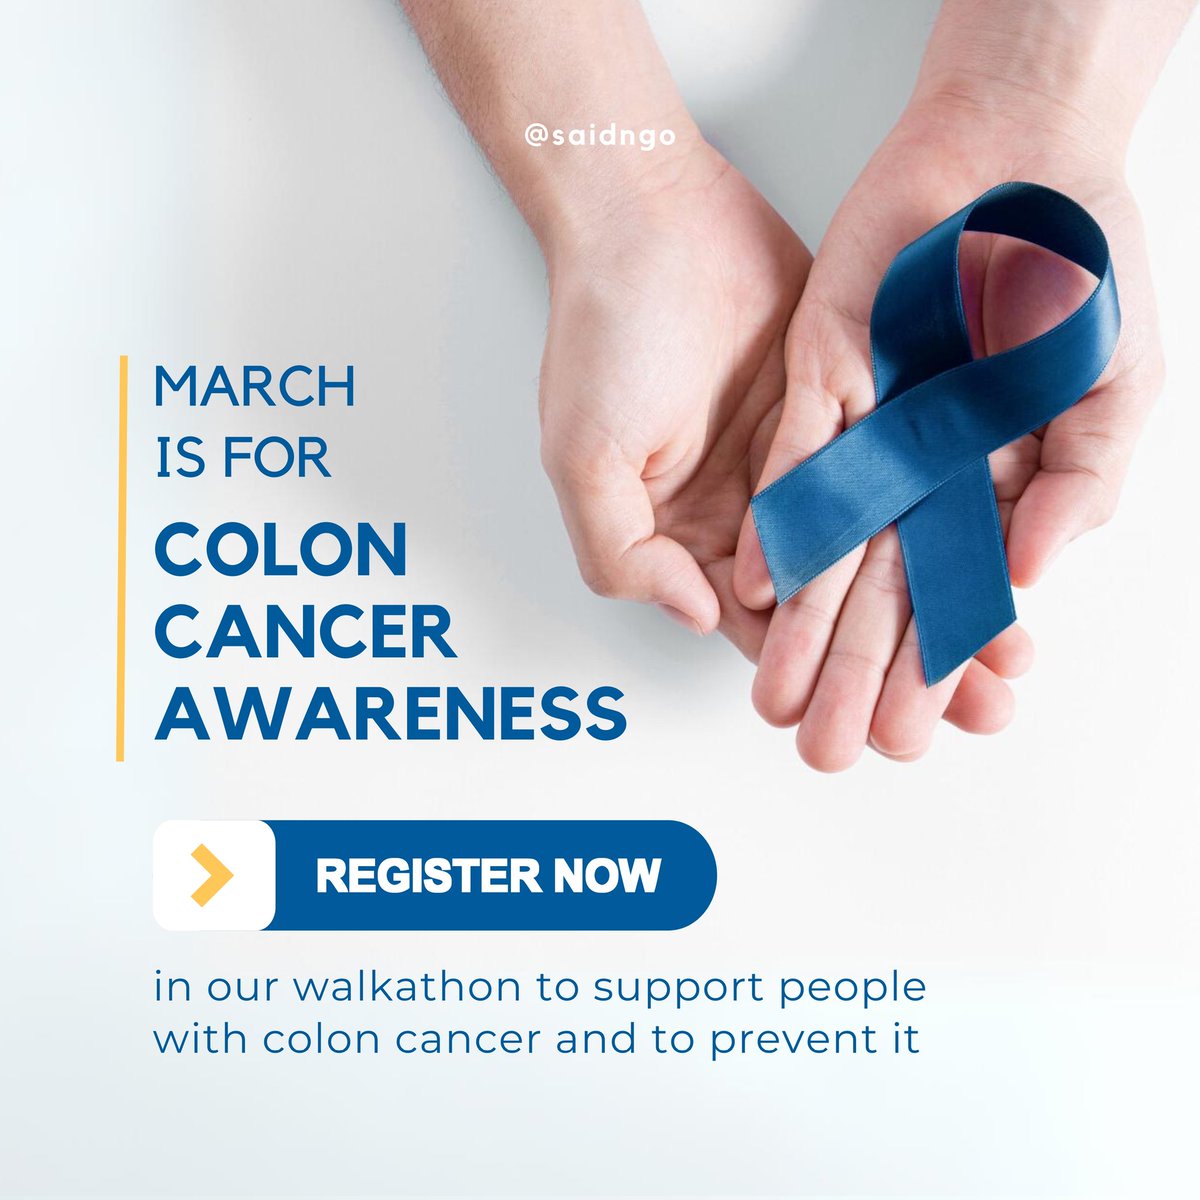 March is here! The colon cancer awareness month.

#coloncancerawareness #coloncancerLebanon #GetScreened 
#Marchforcoloncancer #Marchforsomeonewithcancer #Cancer_is_not_a_taboo #colonoscopy #breakthetaboo  #fikra_Innou_Tkhabrou #coloncancer #coloncancerprevention